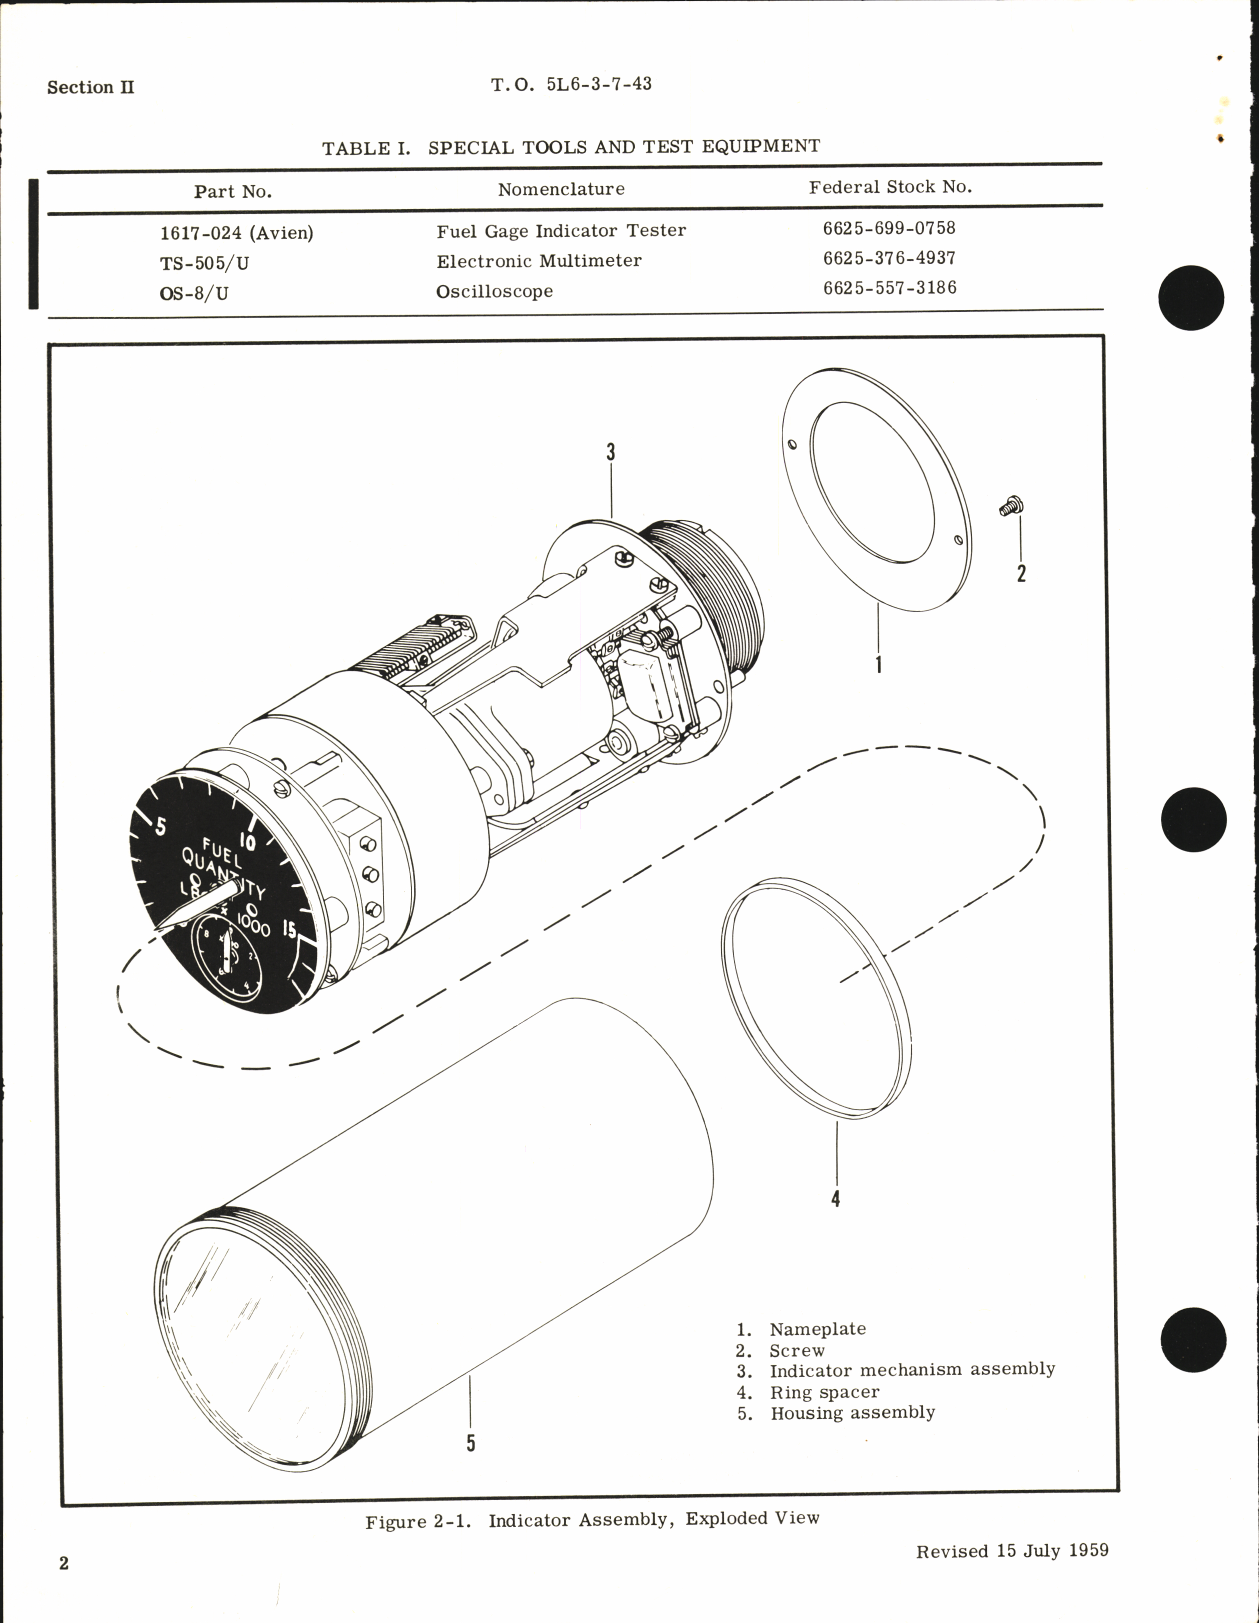 Sample page 6 from AirCorps Library document: Overhaul Instructions for Capacitor-Type Fuel Quantity Gage Indicators (Sensitive Type)